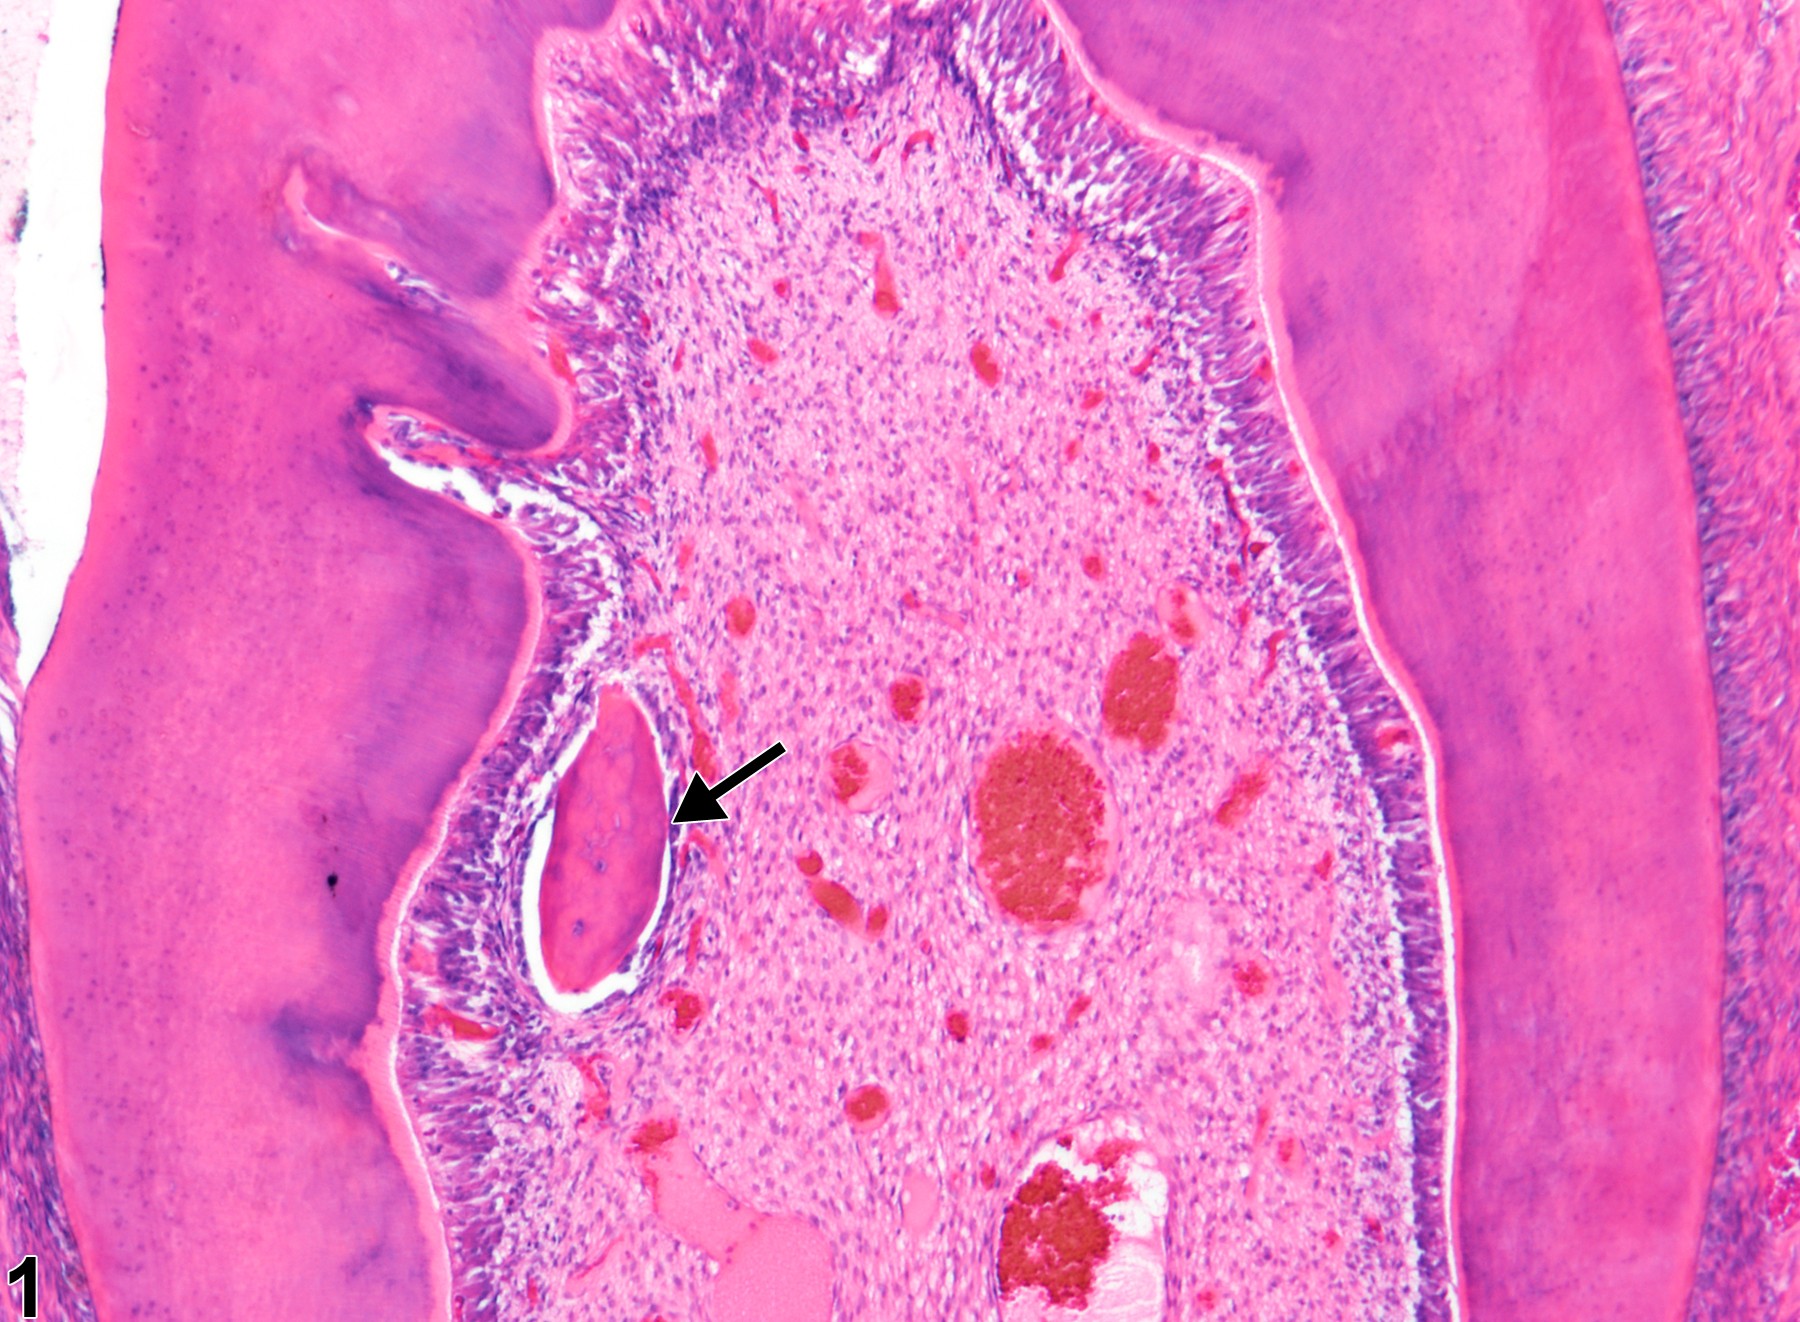 Image of osteodentin in the tooth pulp from a male F344/N rat in a chronic study